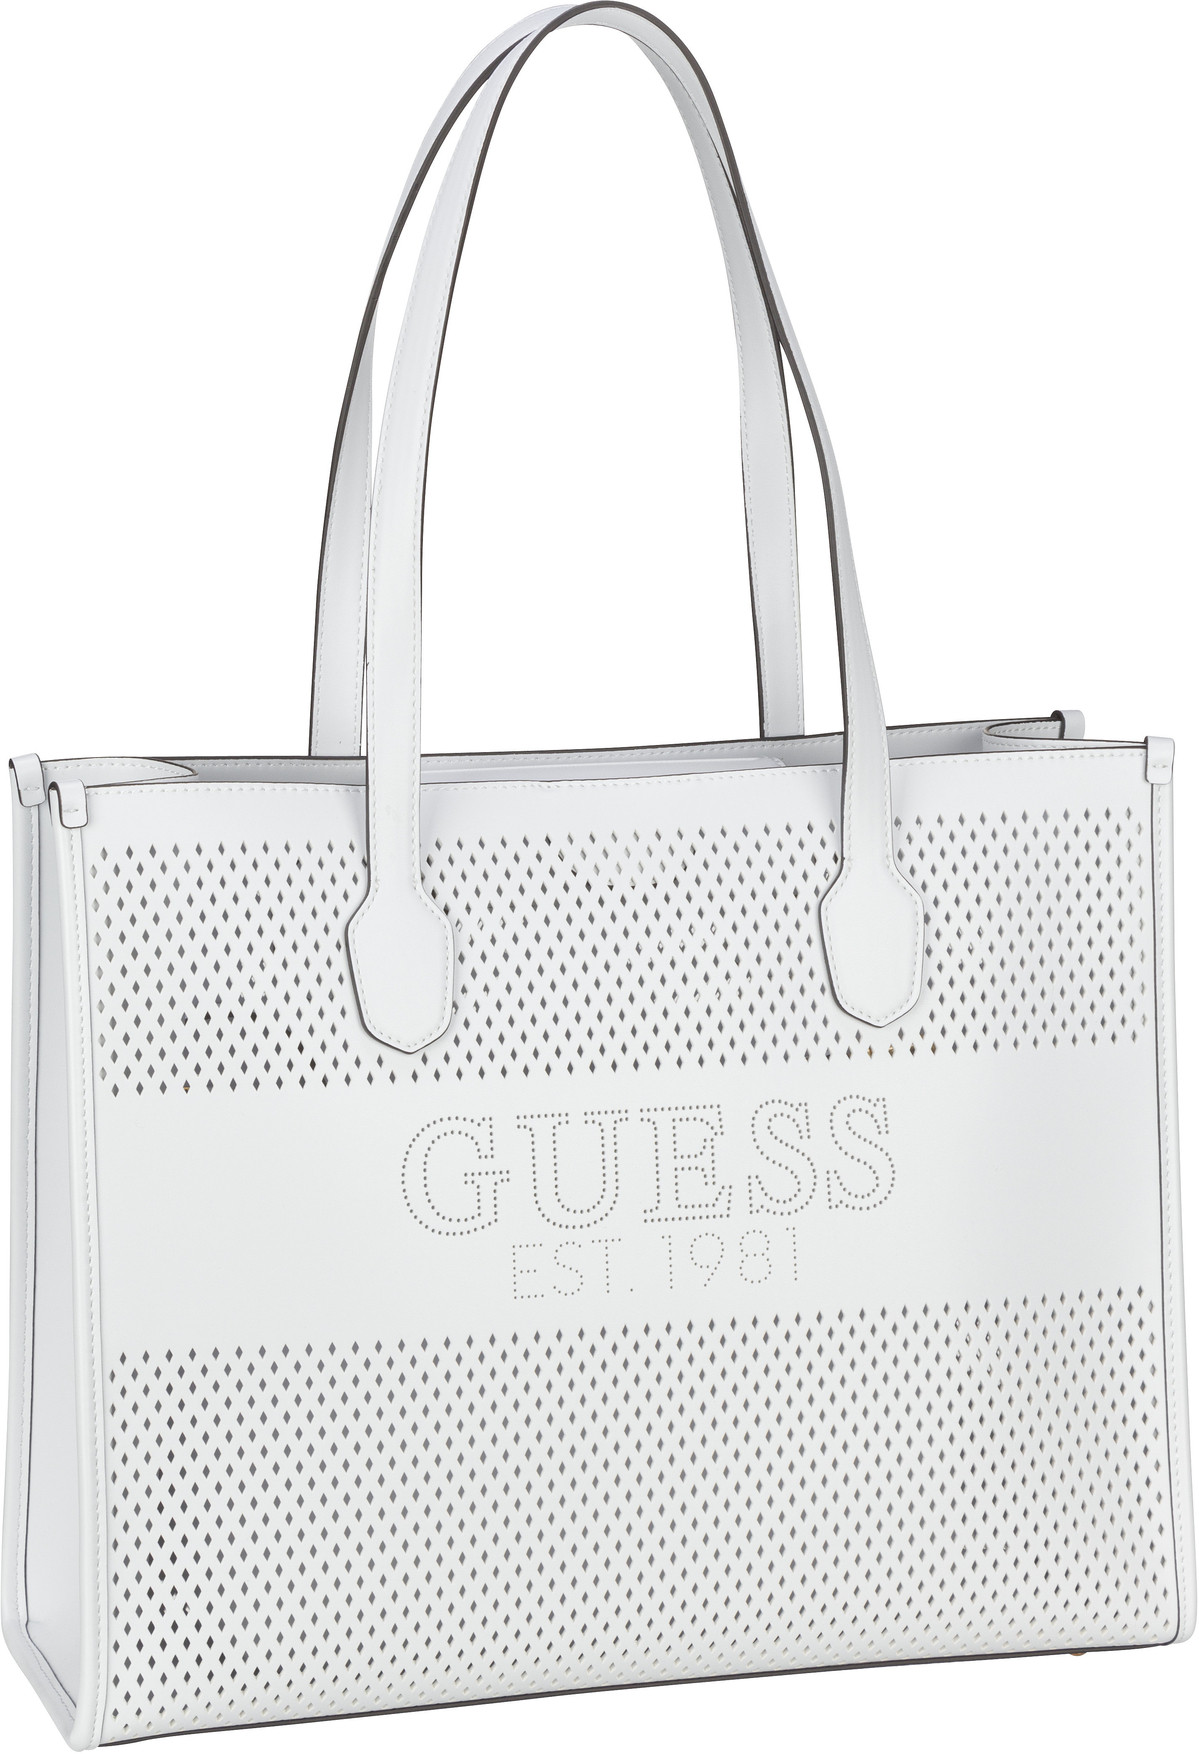 Guess Katey Tote WH - White